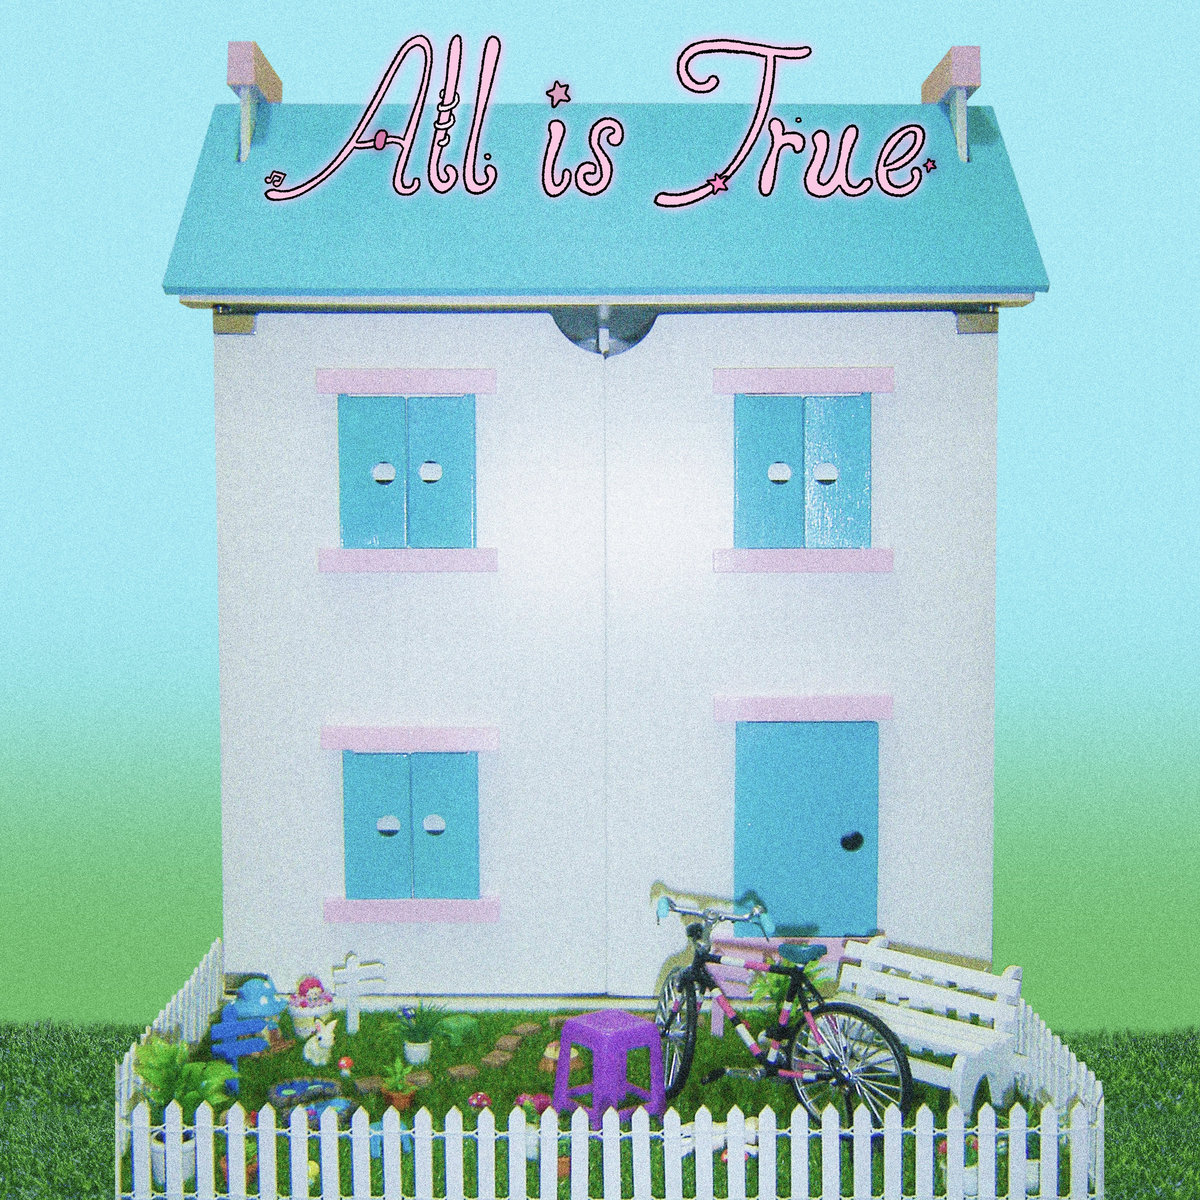 ALBUM REVIEW: The Purest Blue – All is True